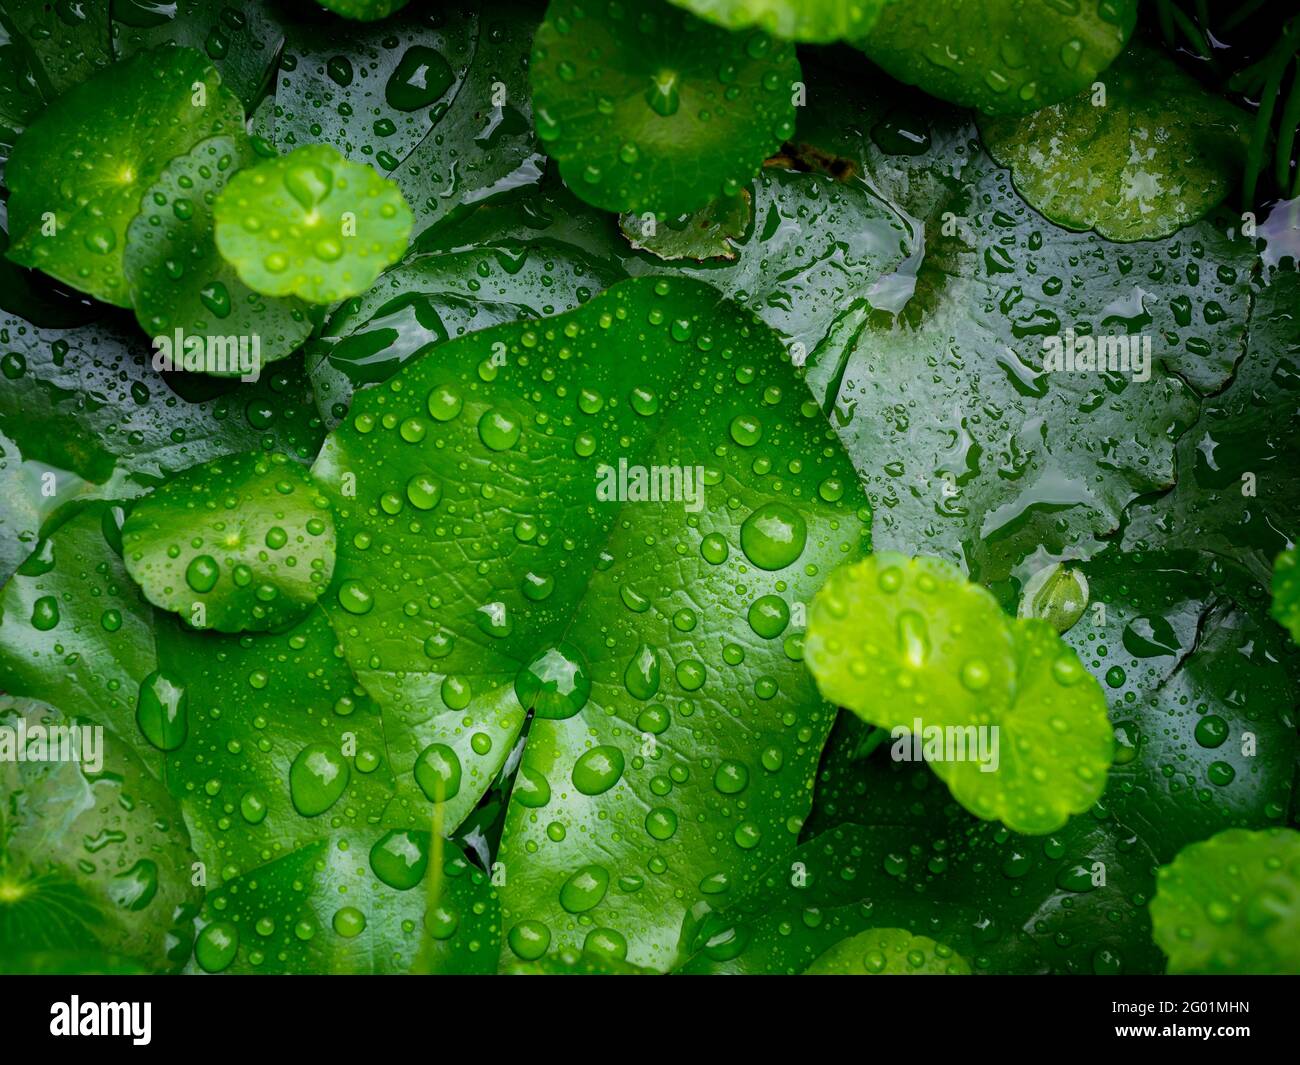 Fresh green leaf with water drops background. Centella asiatica leaves covered with many water drops after raining. Stock Photo